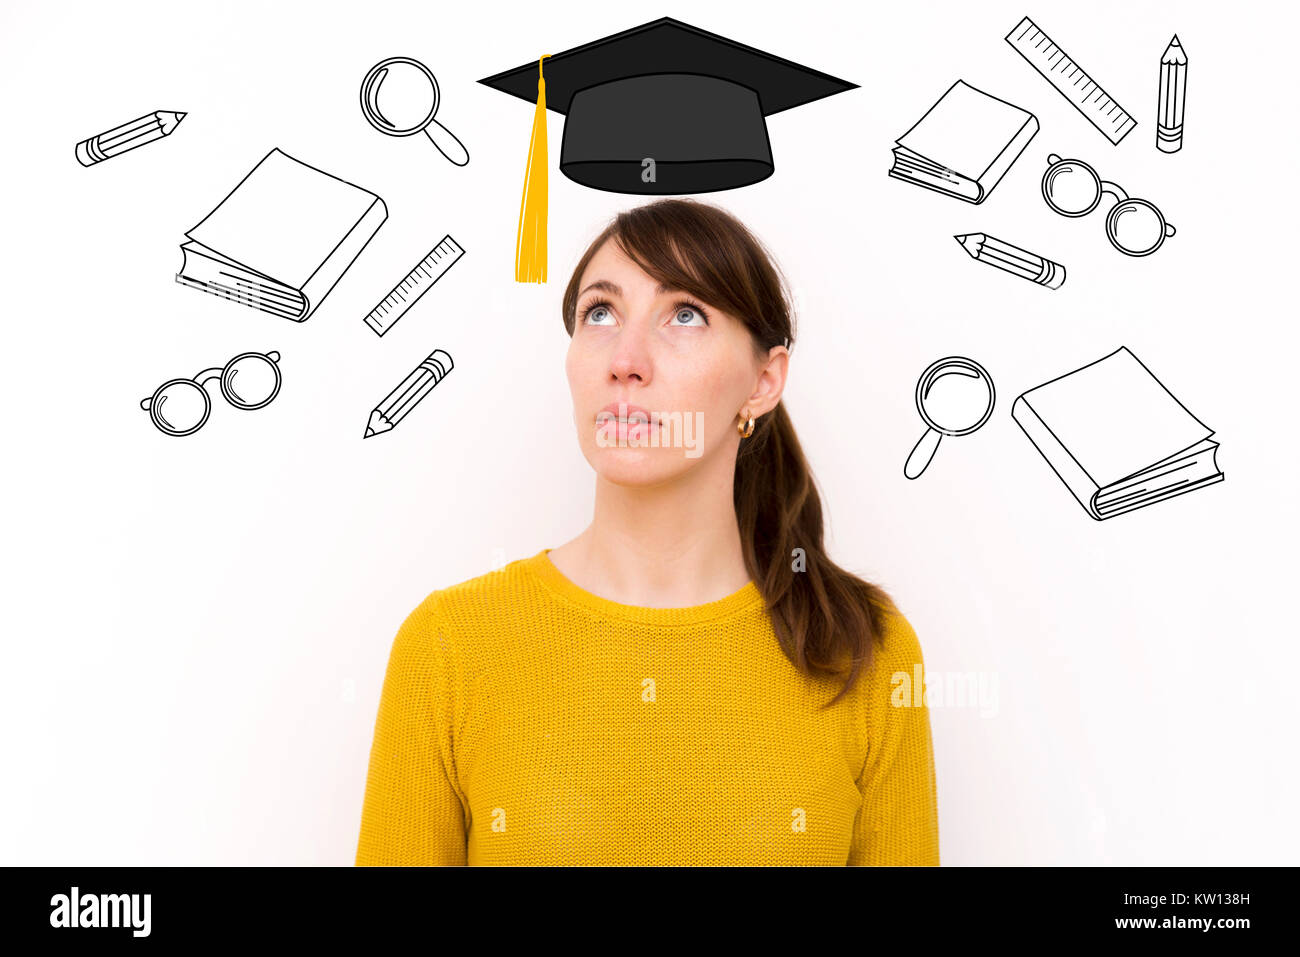 Young beautiful woman is thinking about education at business school. Drawn studying icons and graduation hat. Stock Photo